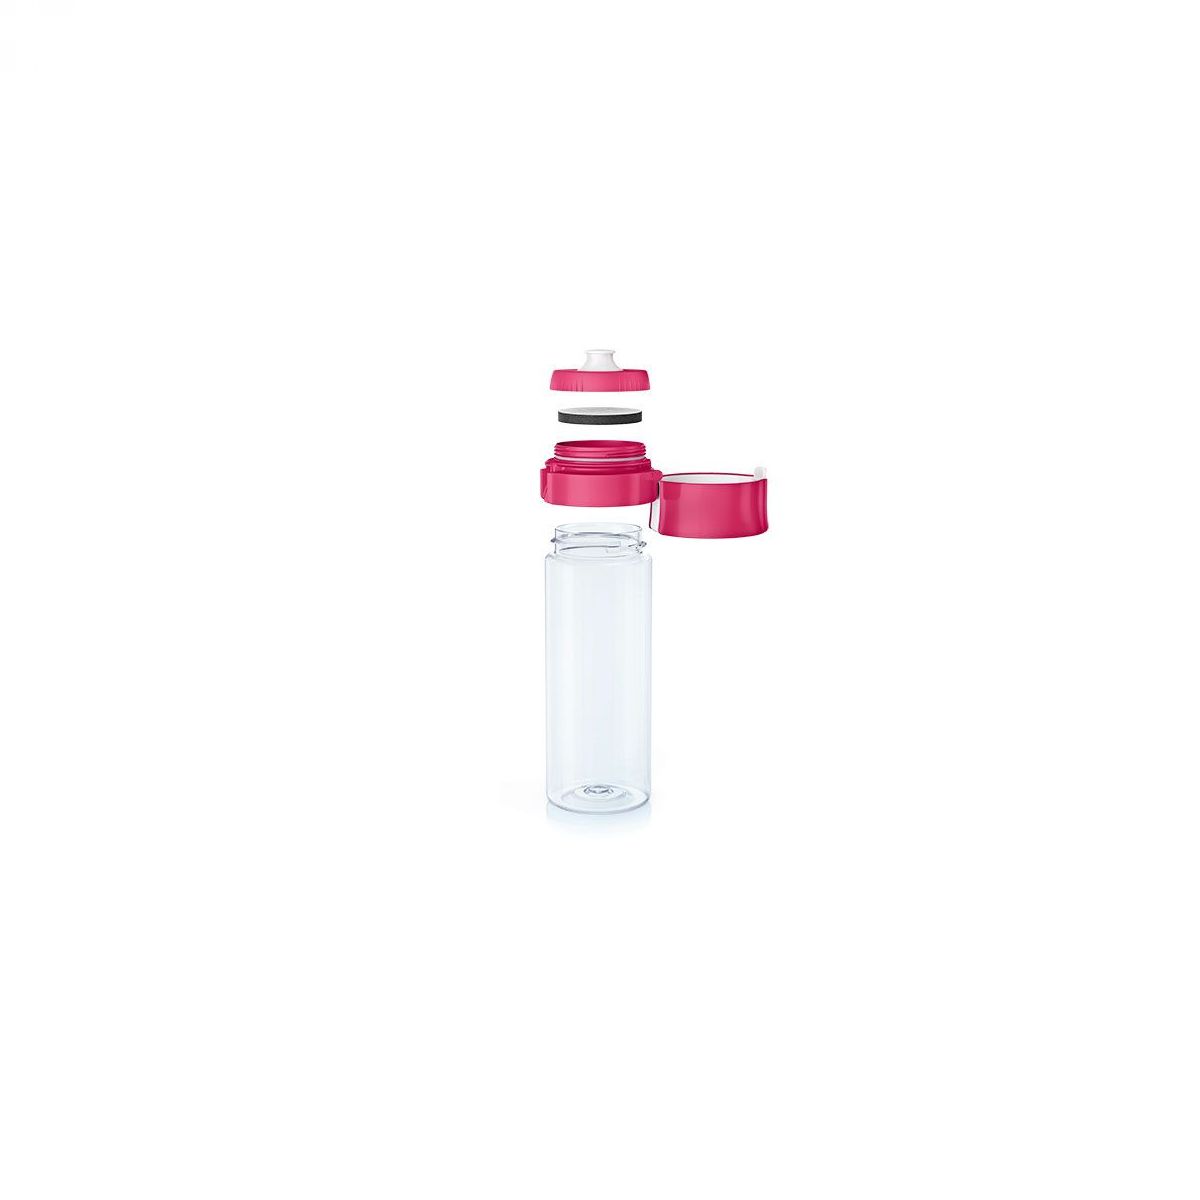 Water filter bottle pink exploded view-copy